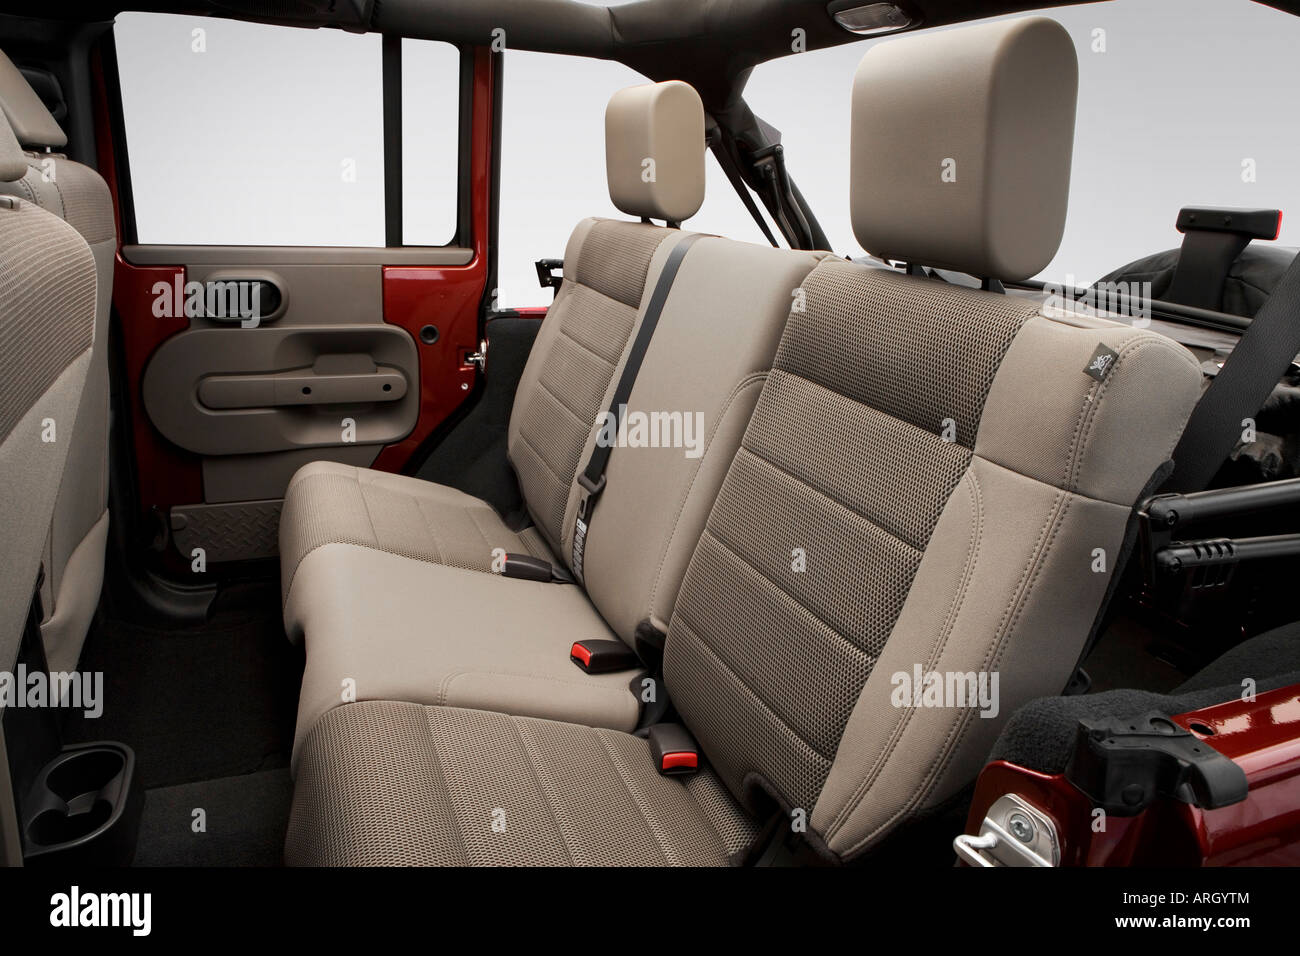 2007 Jeep Wrangler Unlimited Sahara in Red - Rear seats Stock Photo - Alamy